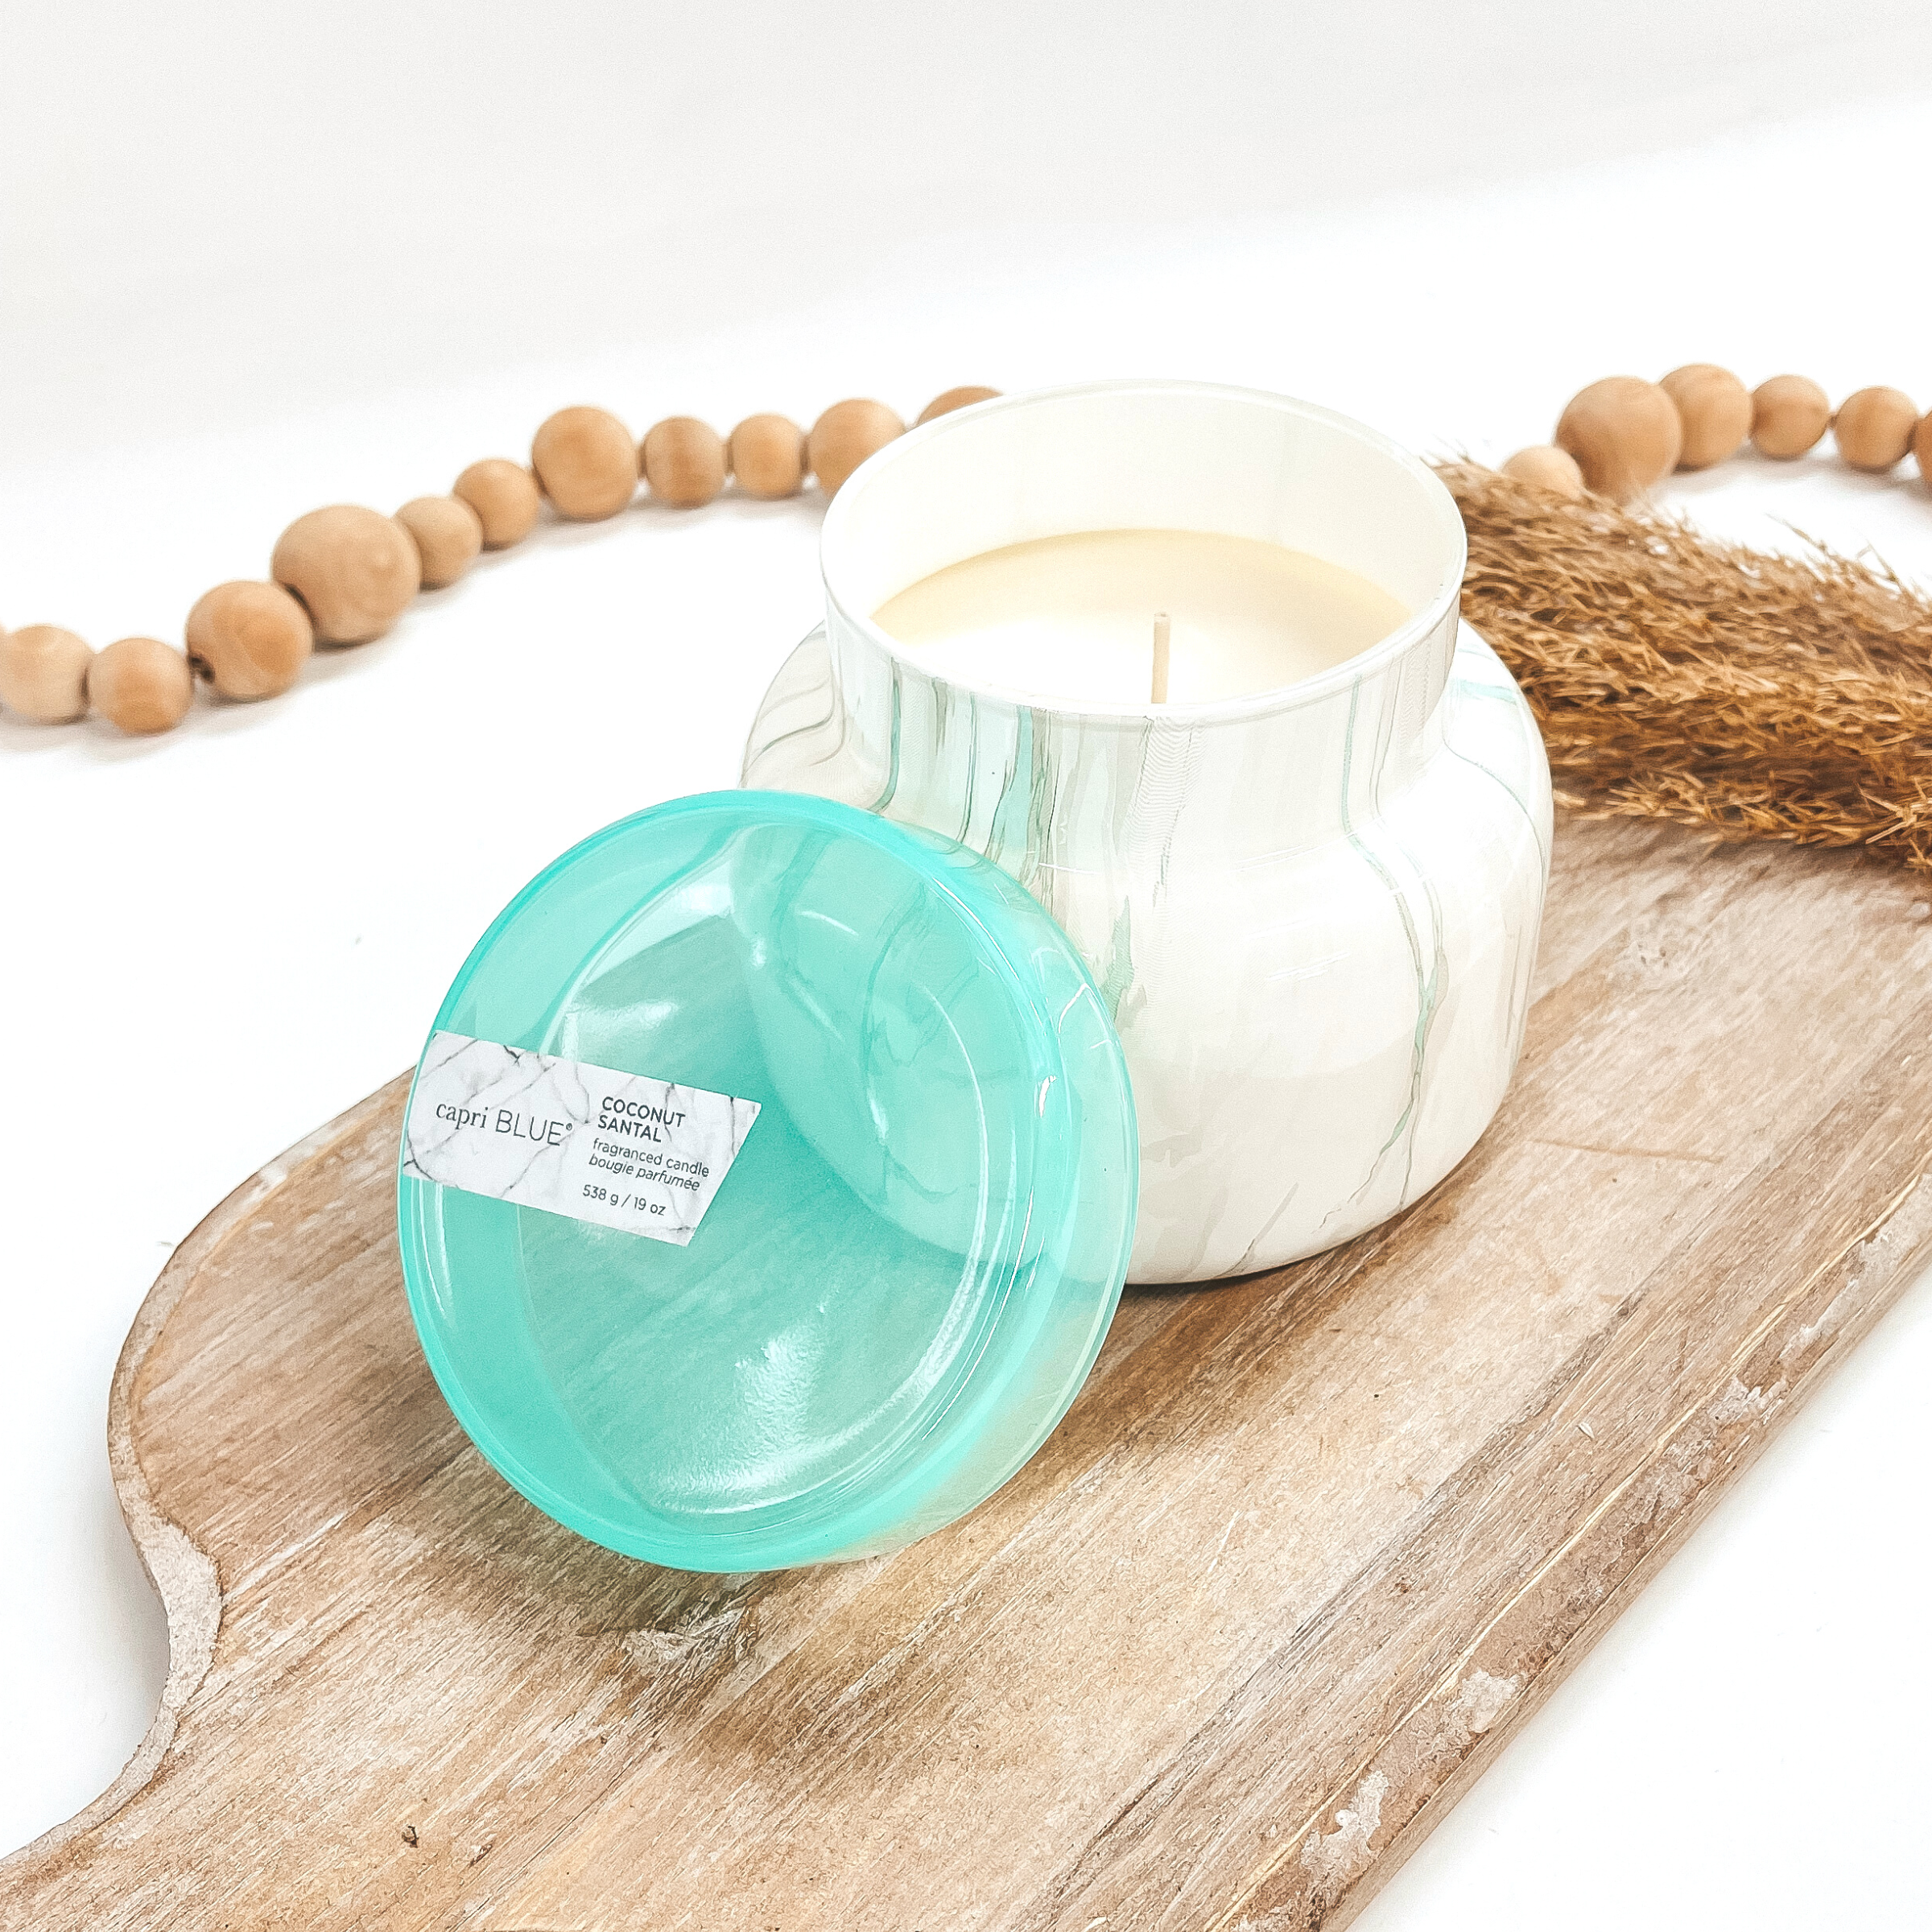 Capri Blue | 19 oz. Marble Jar Candle in Sea Glass | Coconut Santal - Giddy Up Glamour Boutique